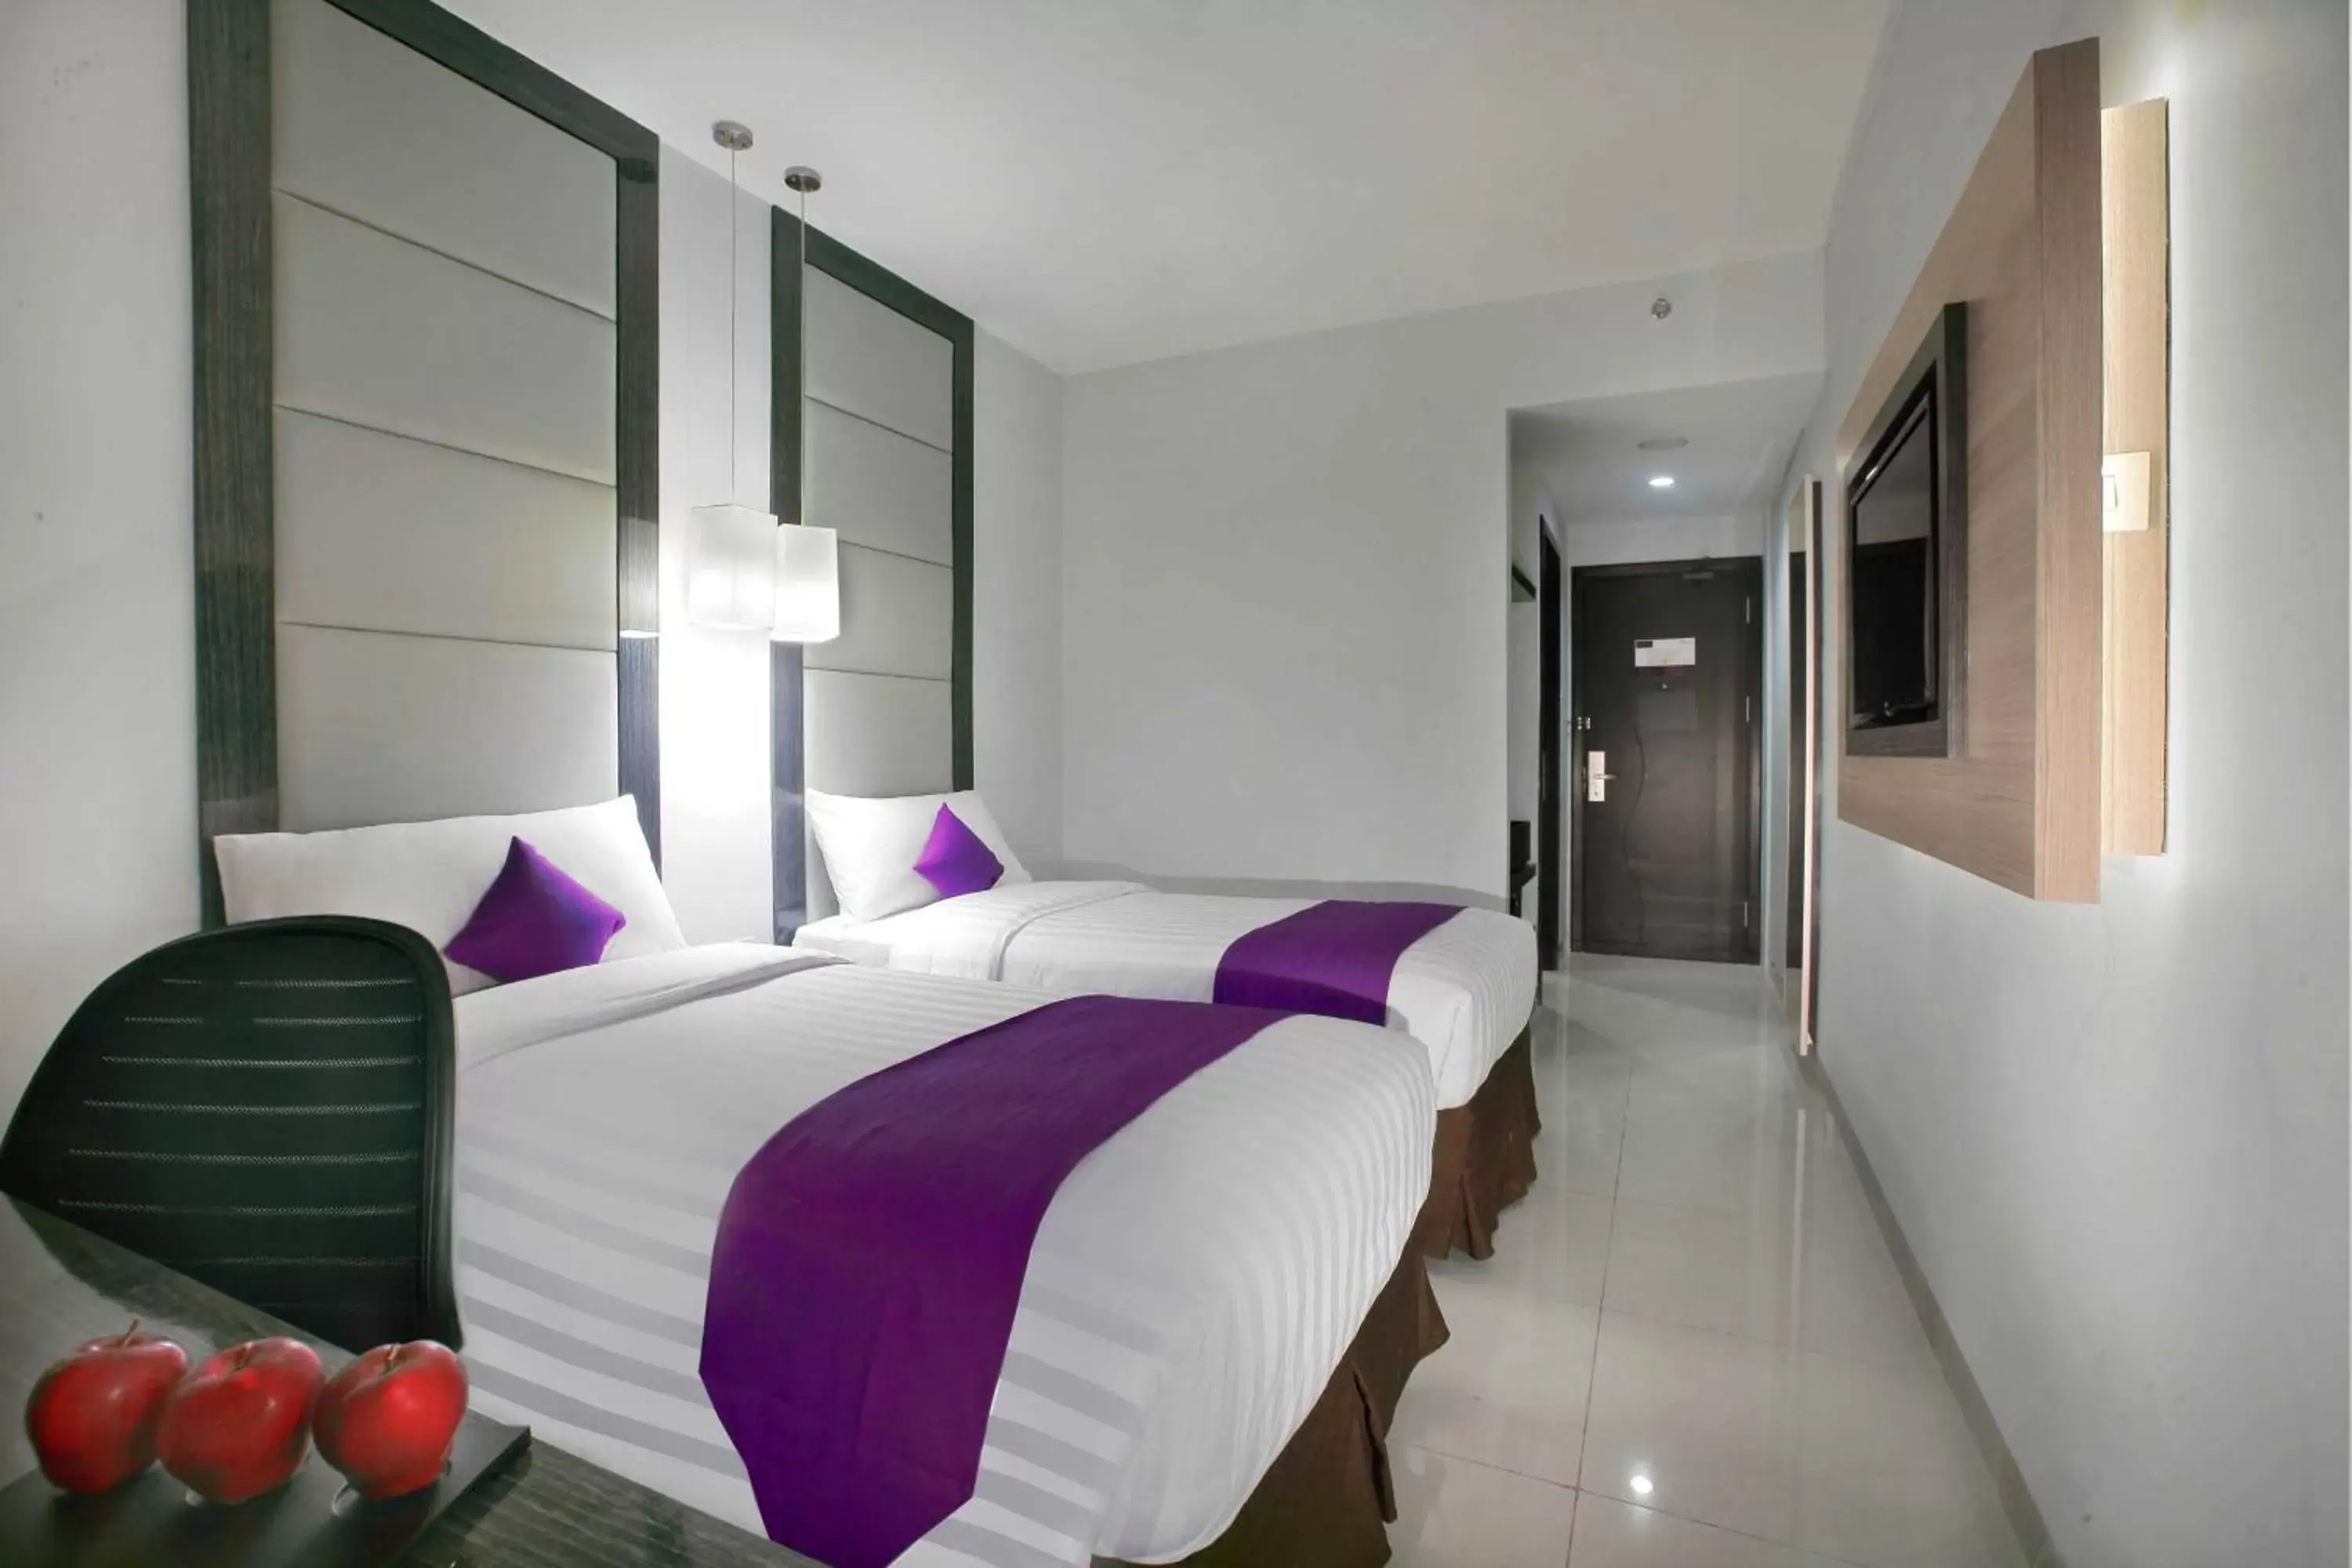 Bed, Room Photo in Quest Hotel Balikpapan by ASTON